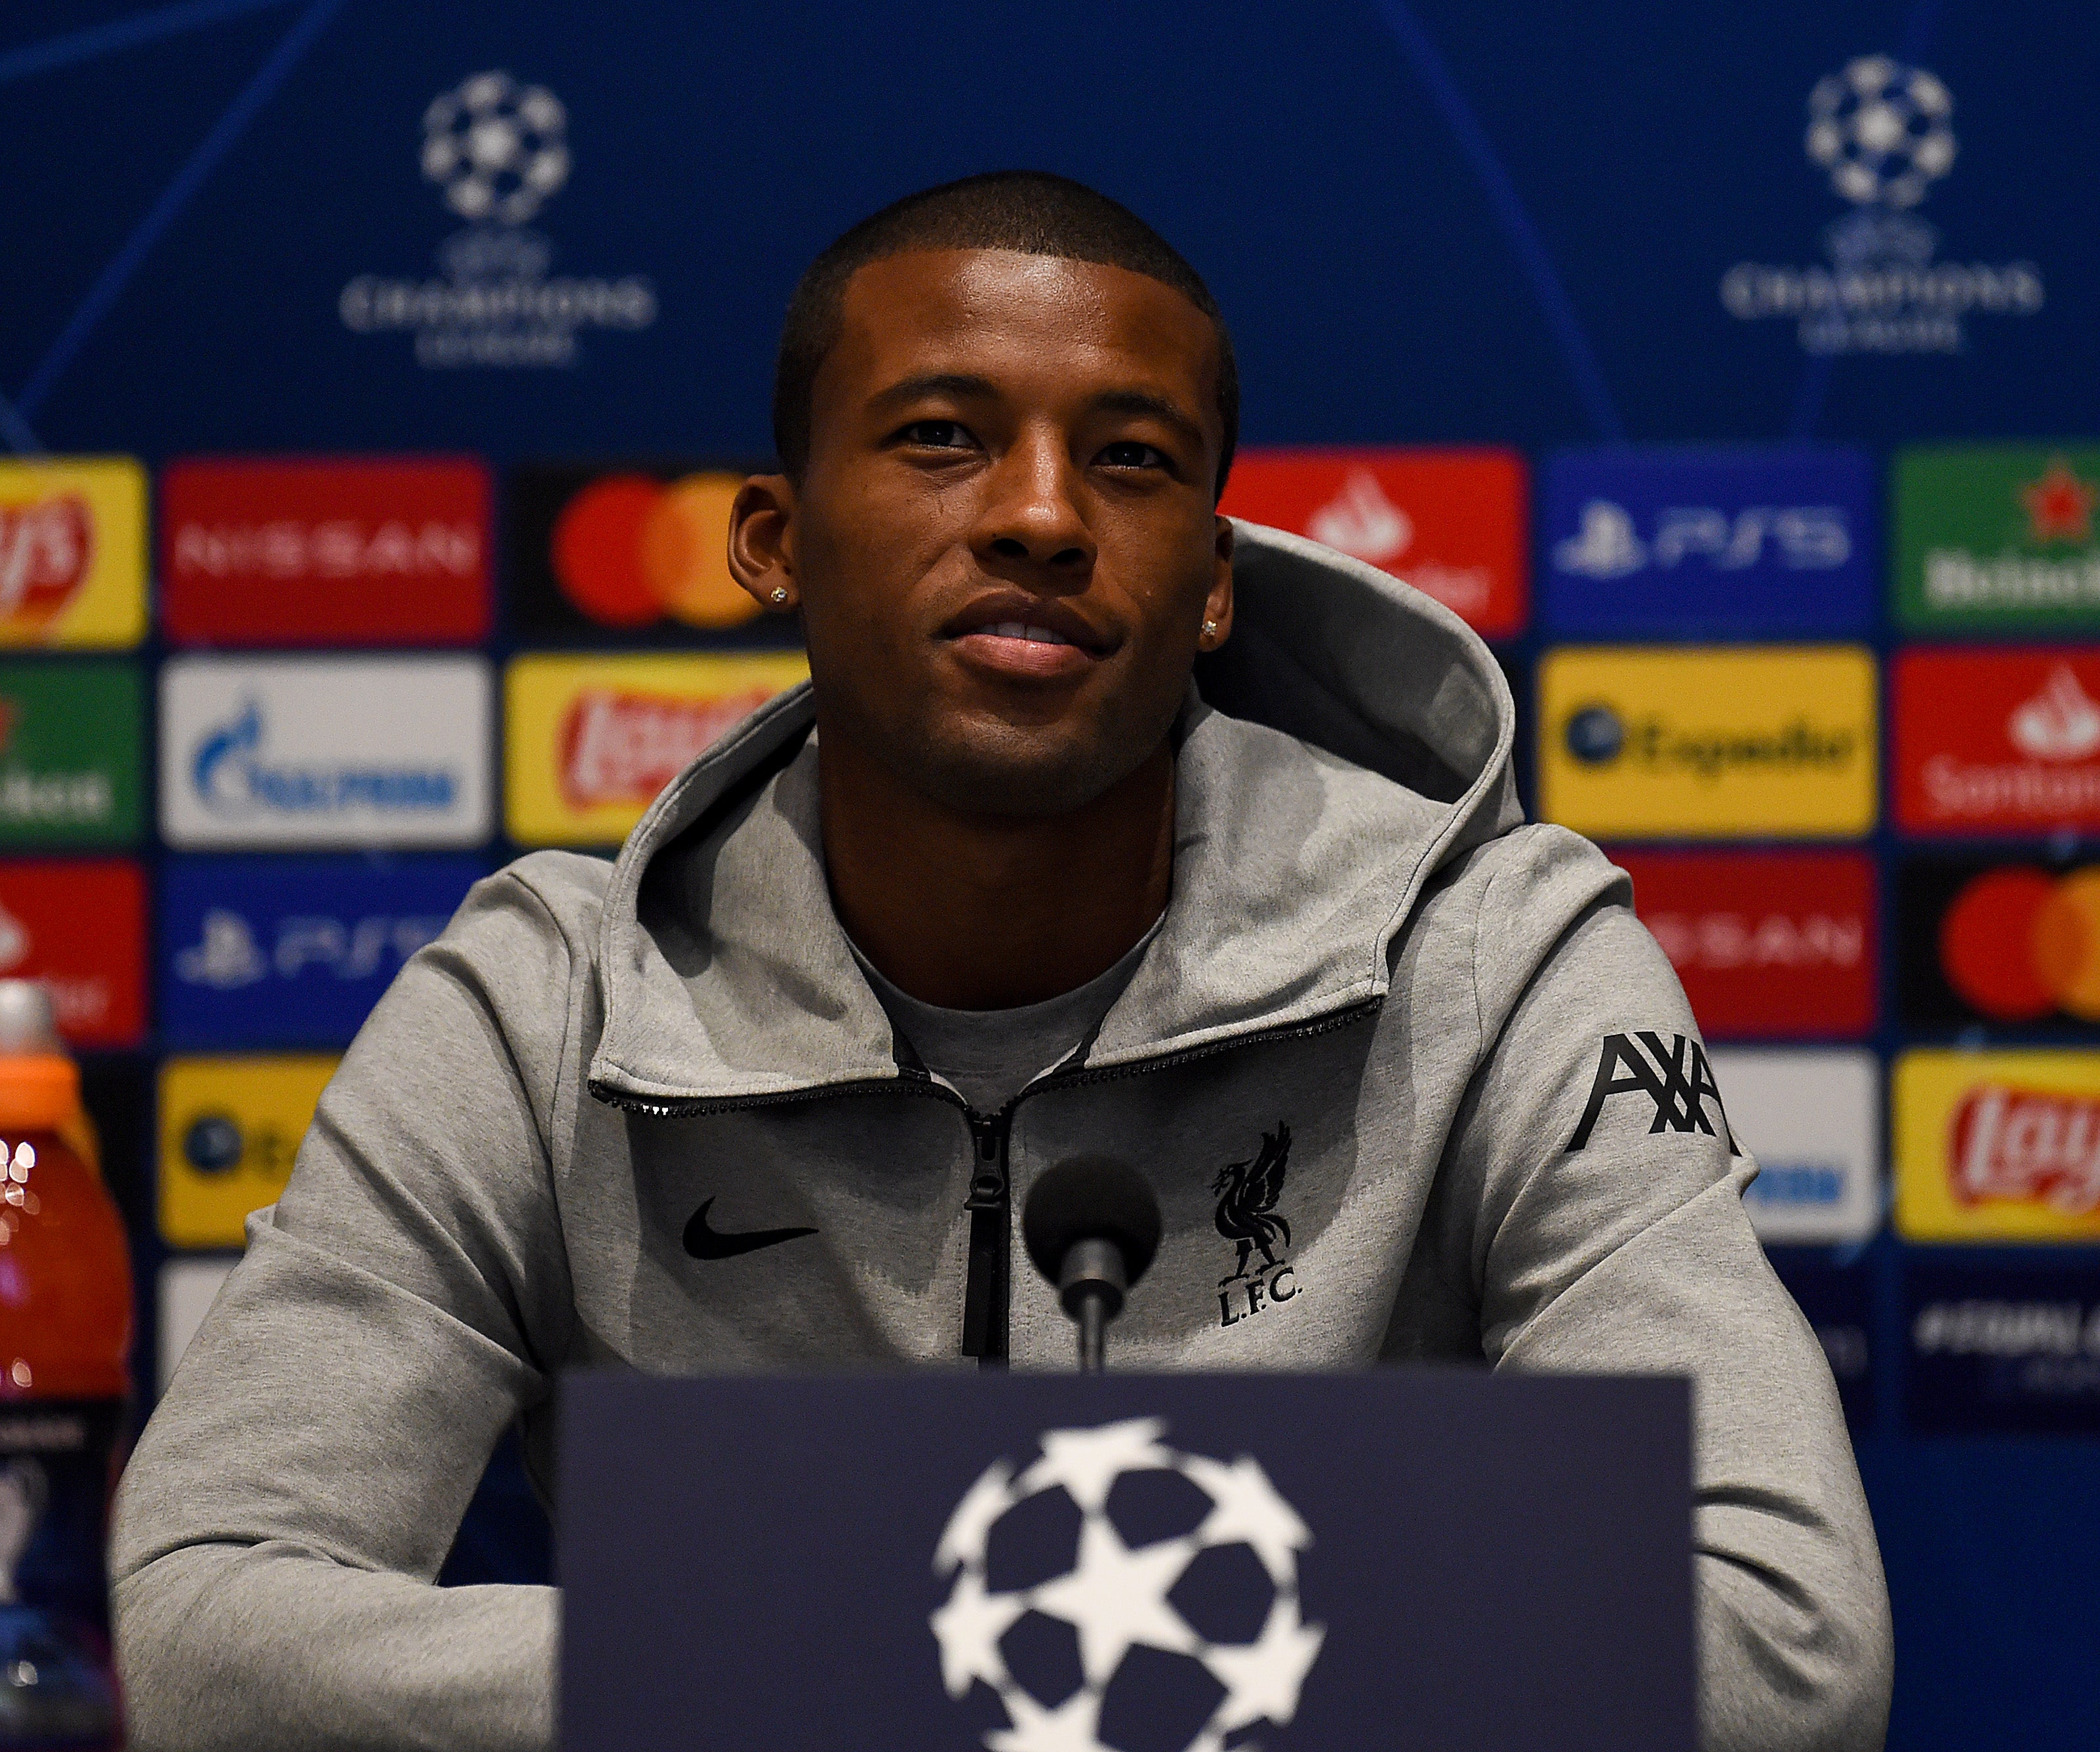 Wijnaldum was angered by the approach of Everton